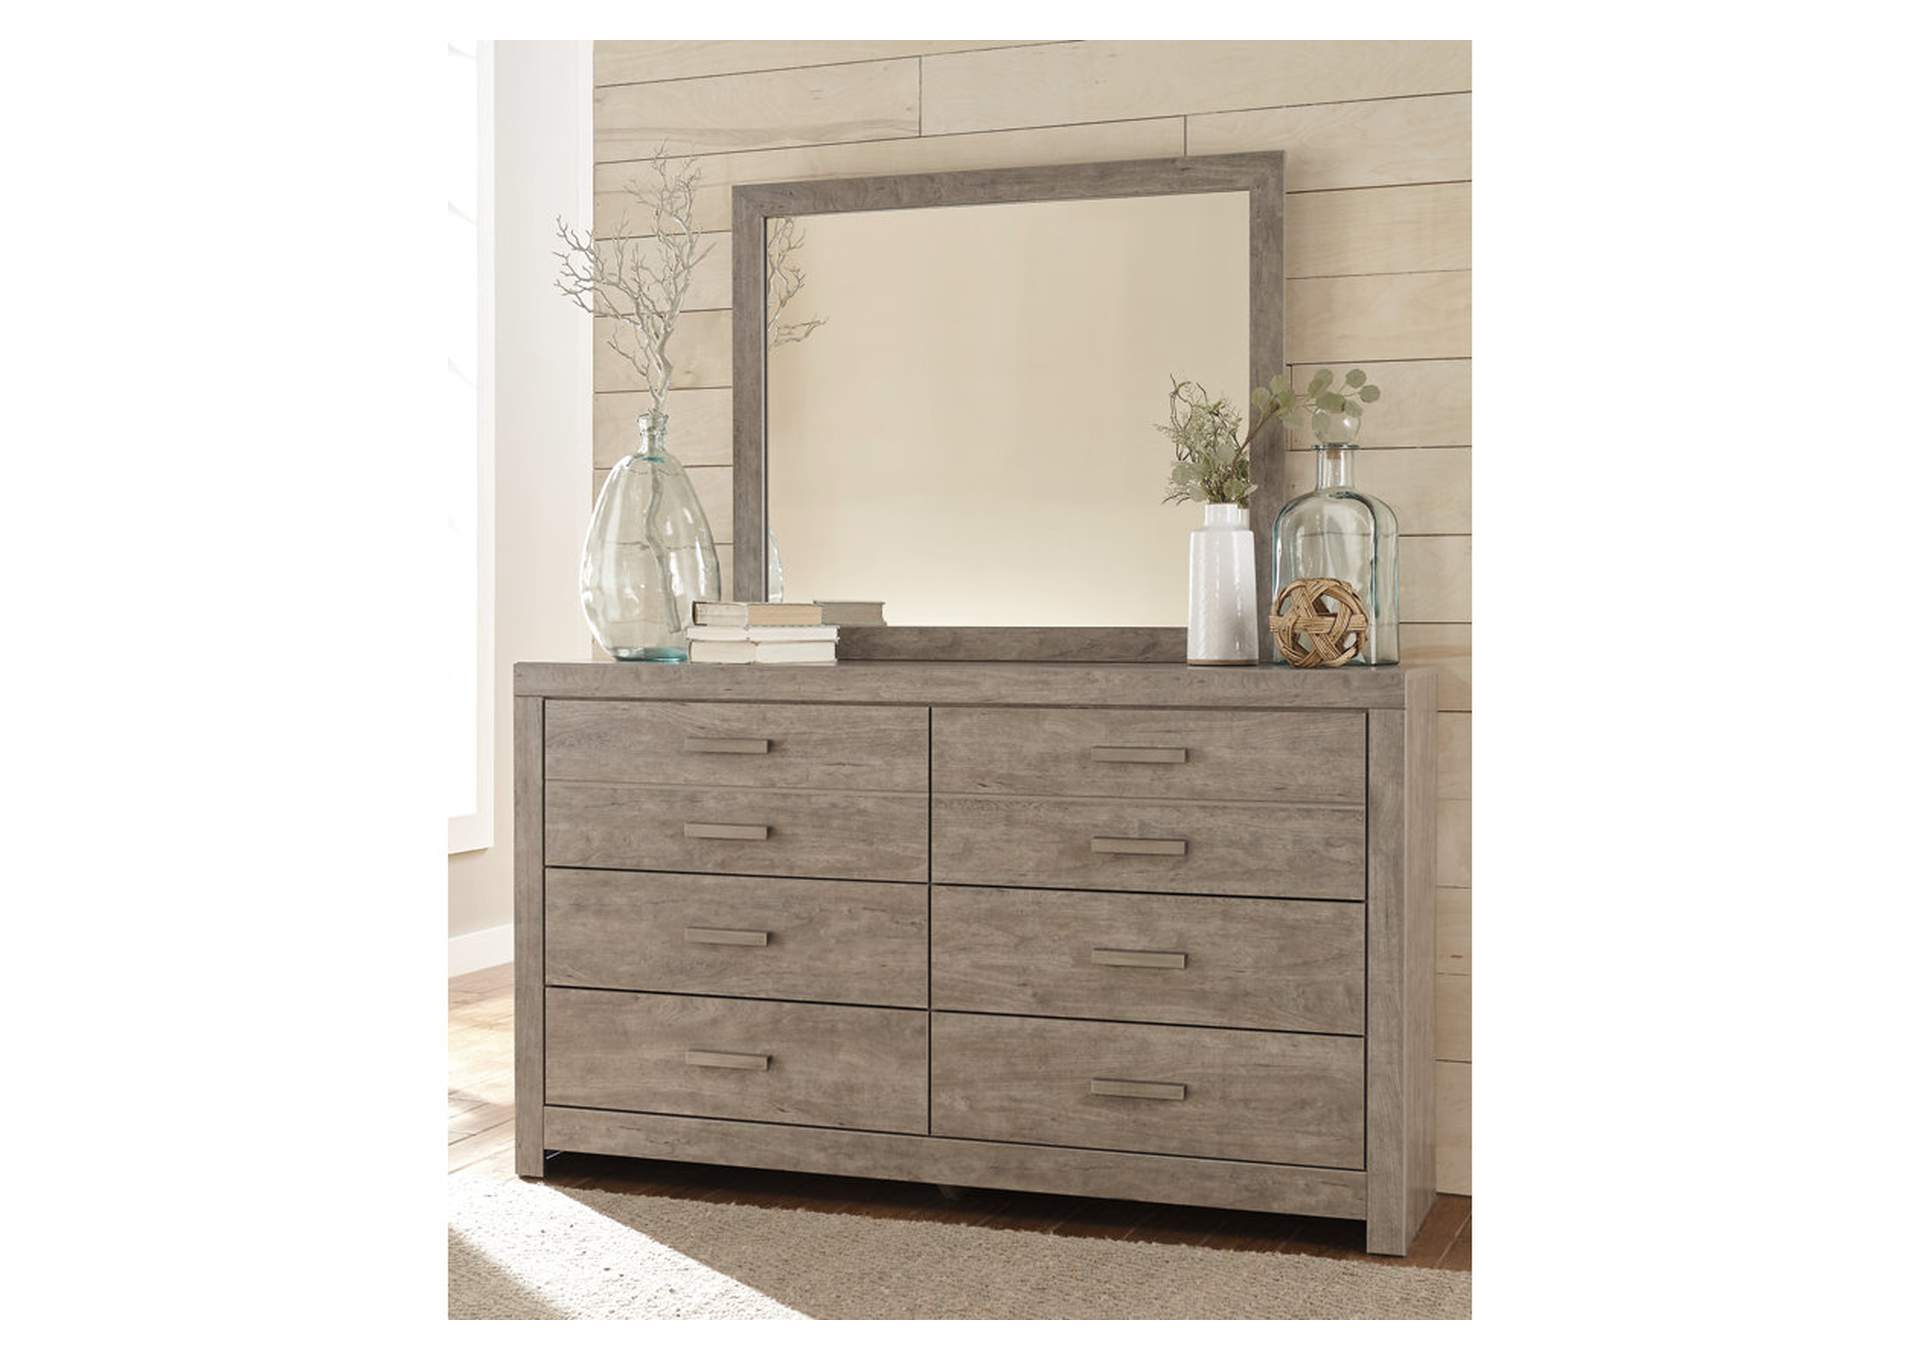 Culverbach Queen Panel Bed with Mirrored Dresser, Chest and 2 Nightstands,Signature Design By Ashley